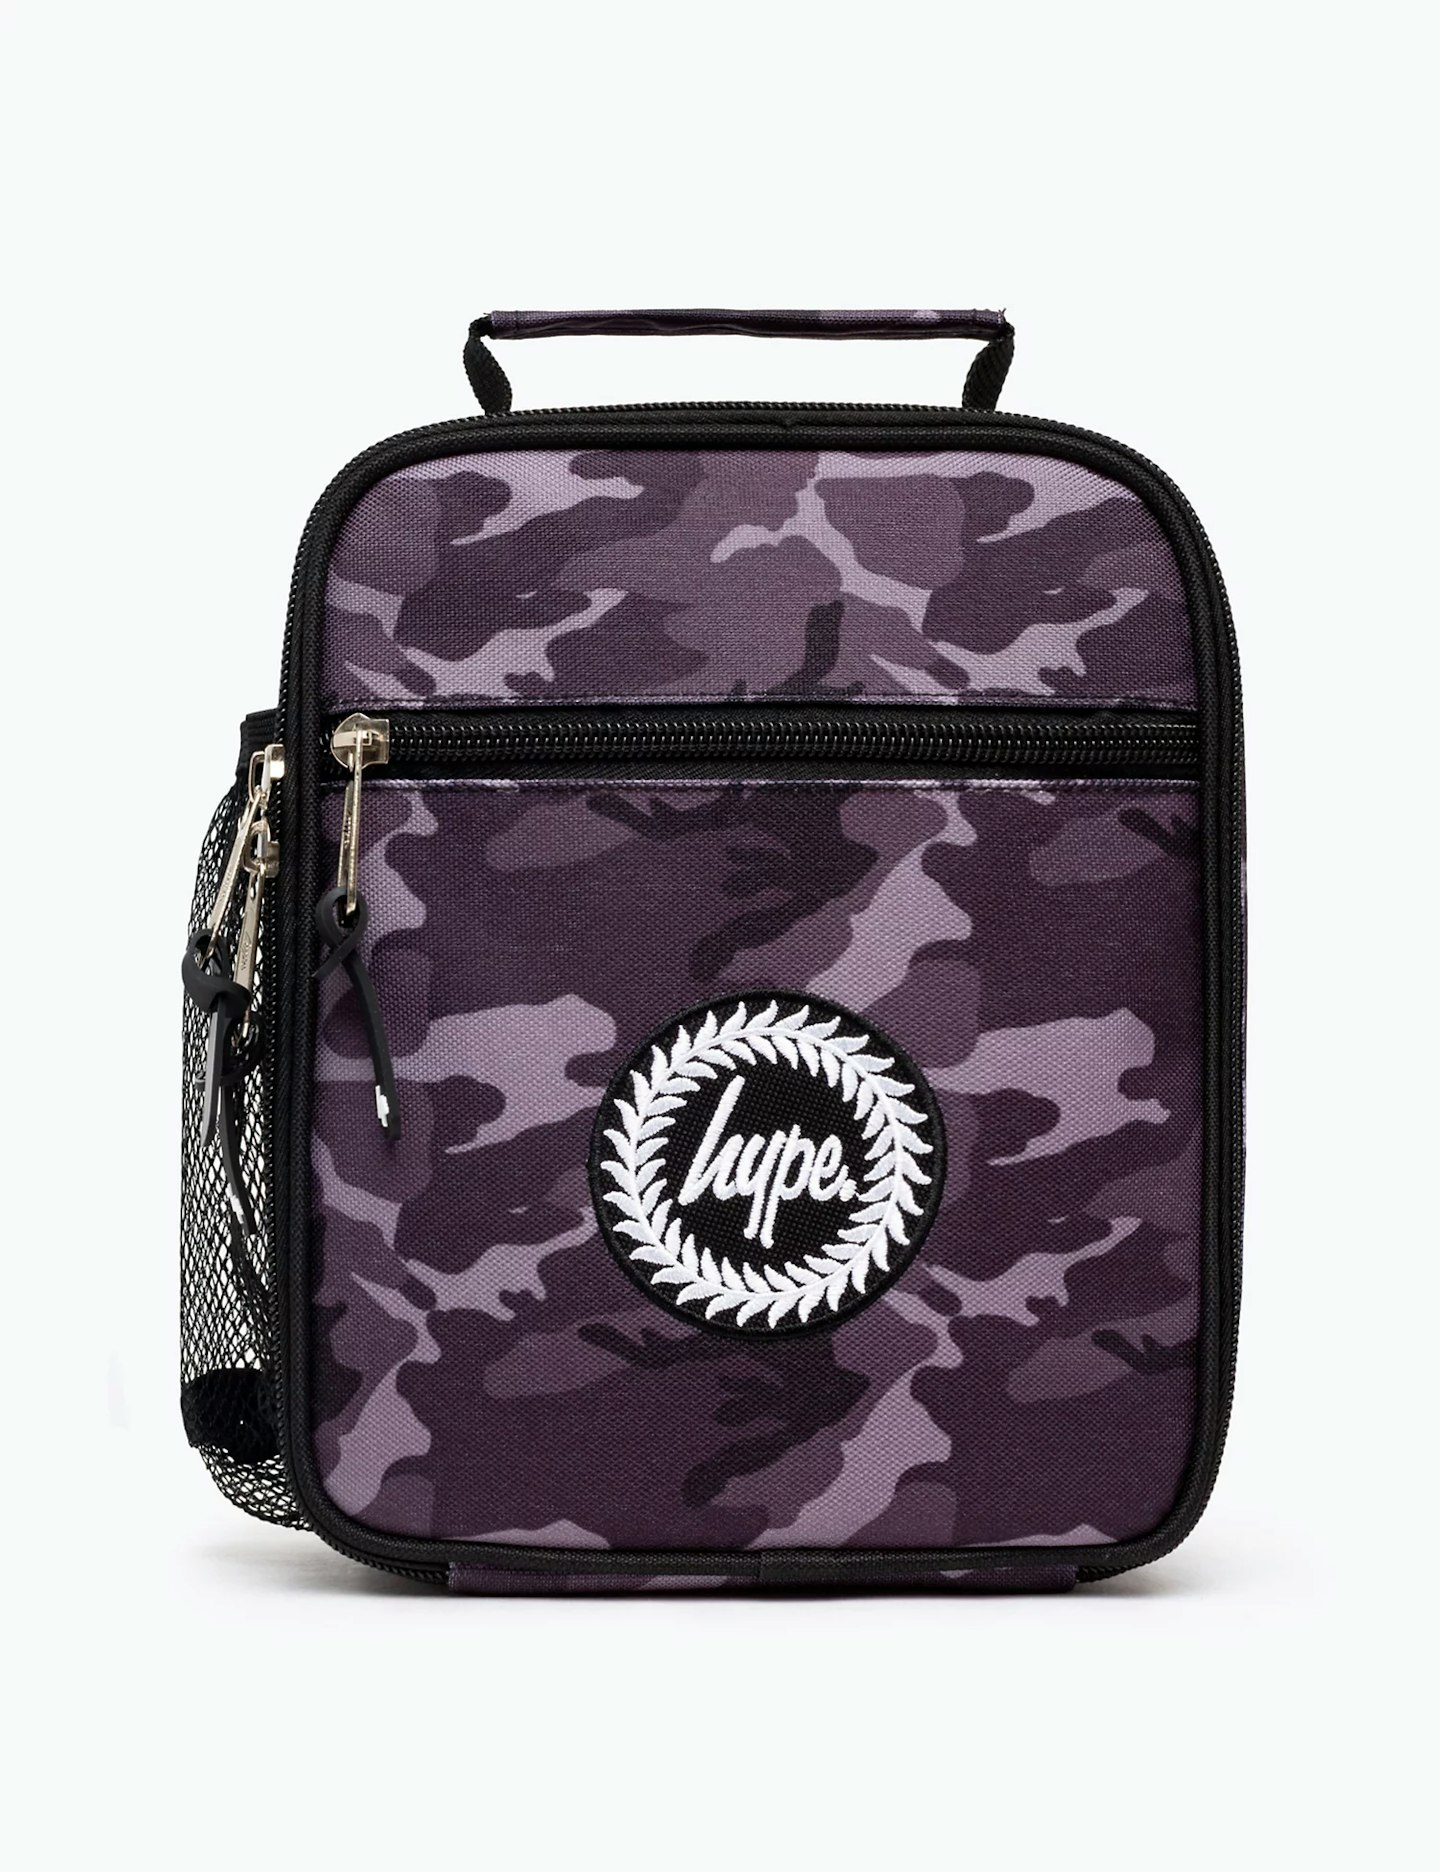 HYPE Kids' Camouflage Print Lunch Box